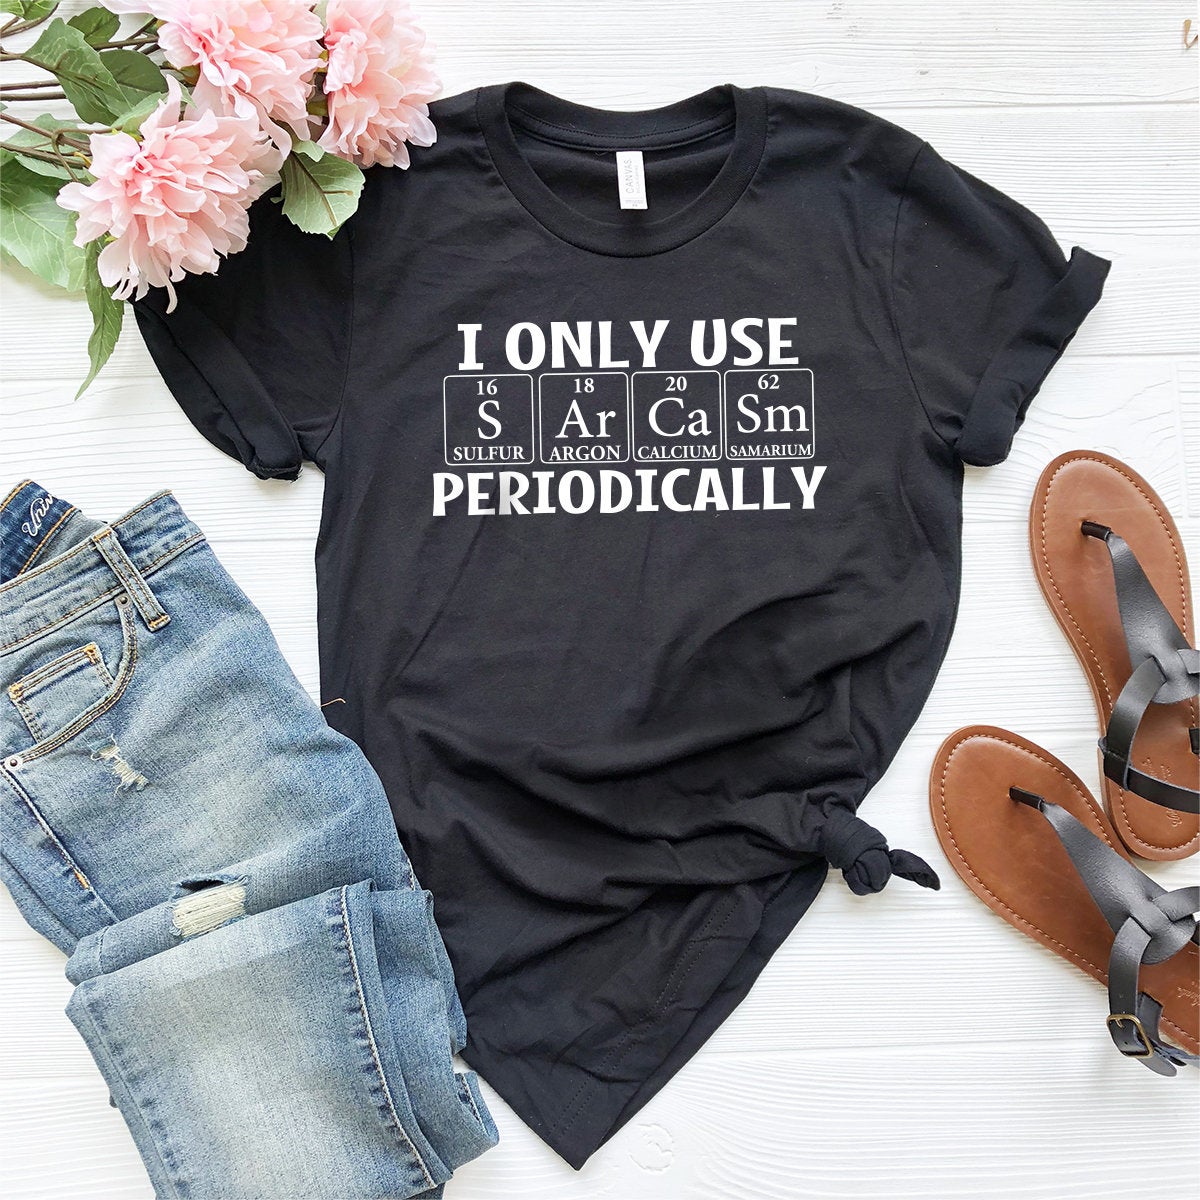 Sarcastic Tshirt, I Only Use Sarcasm Periodically Shirt, Funny Chemistry Shirt, Funny Science Tshirt, Sarcastic Chemistry Shirt - Fastdeliverytees.com